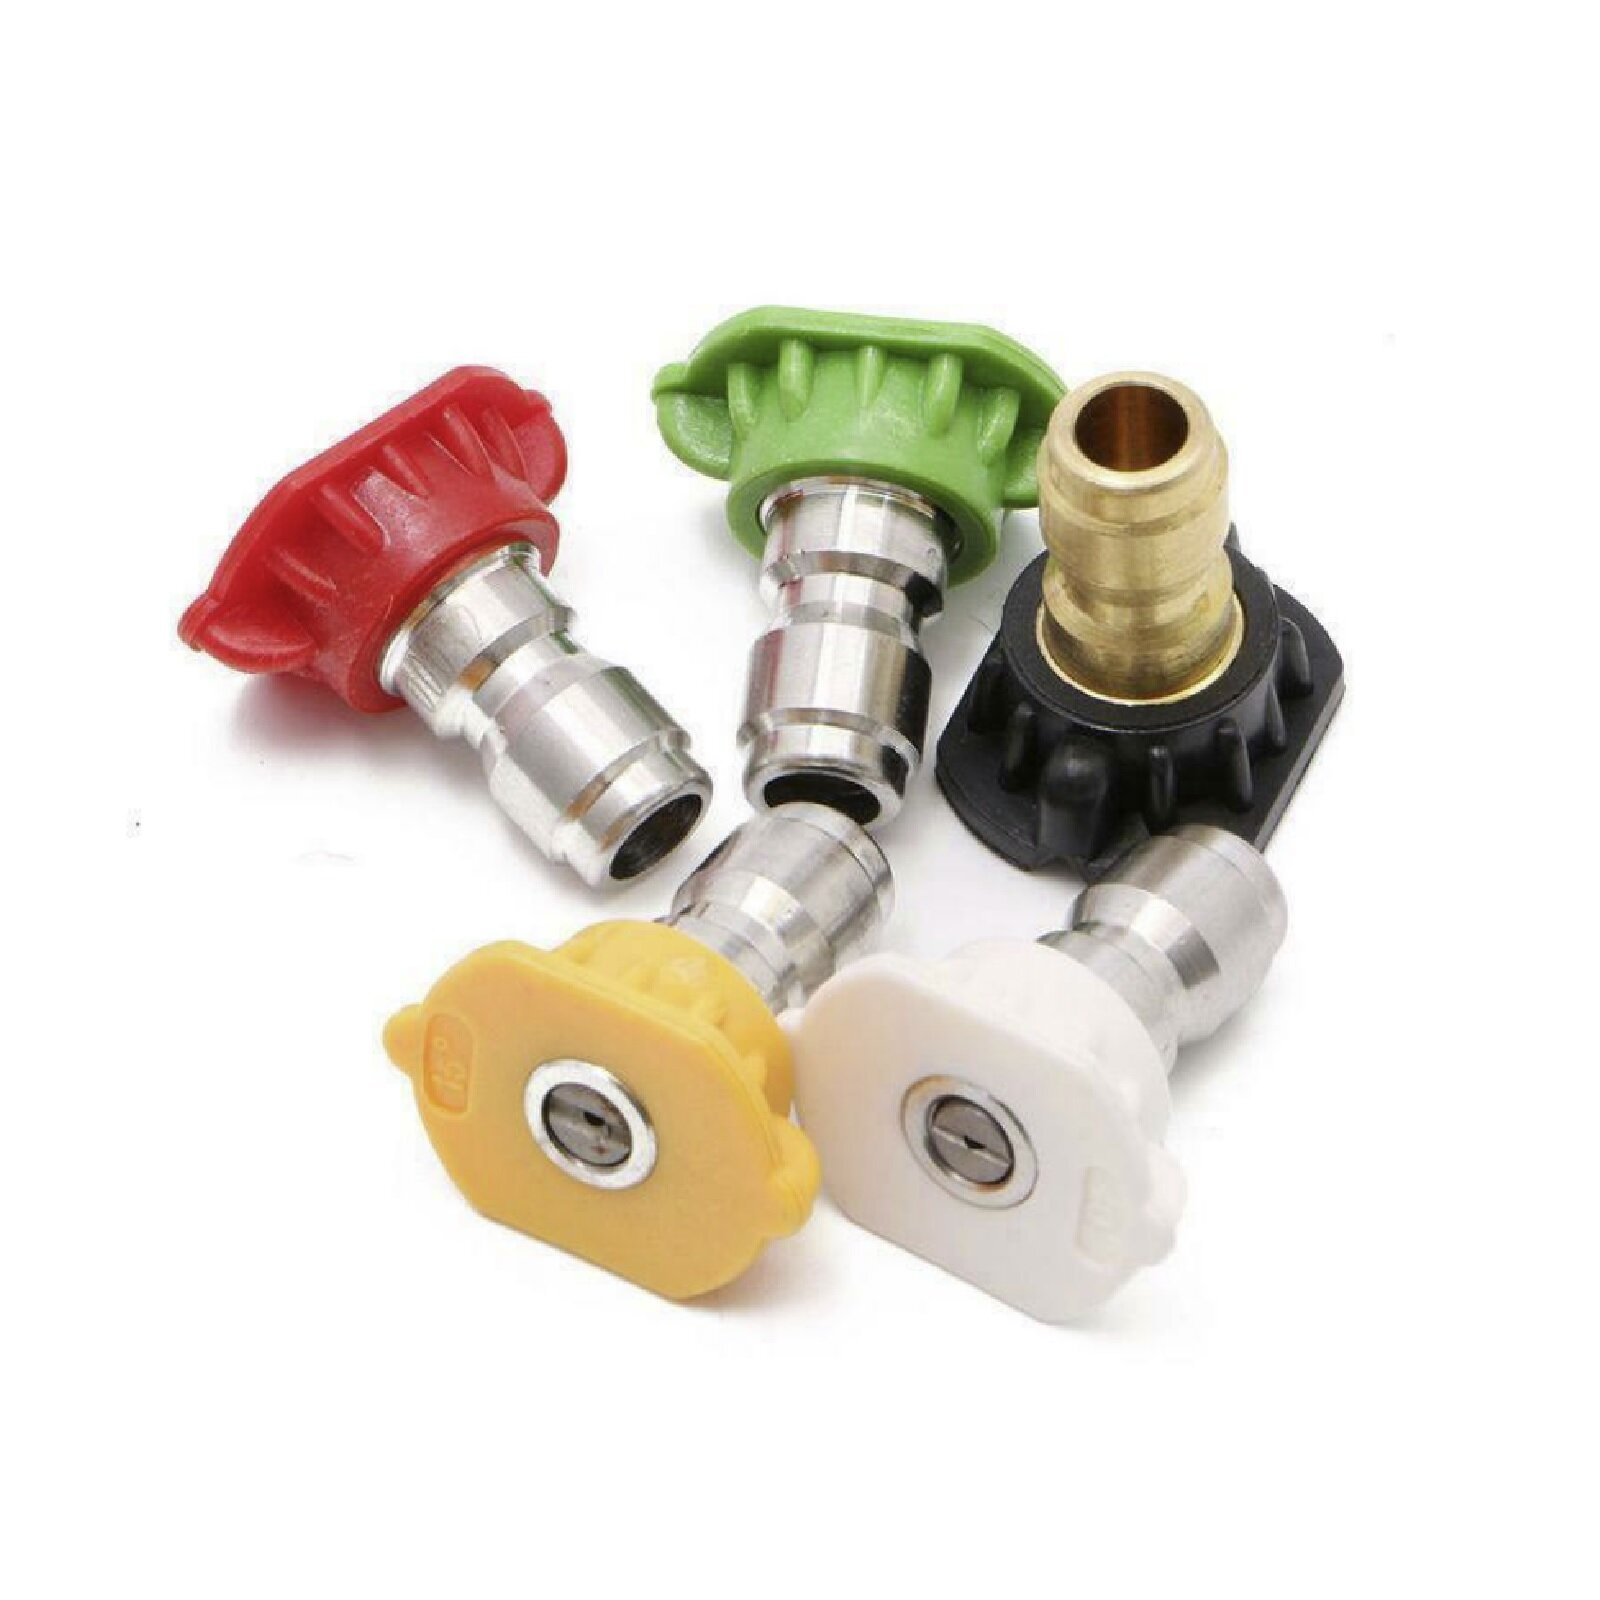 5pcs/Set Power Pressure Washer Spray Nozzle Variety Degrees Quick Connect US AN 